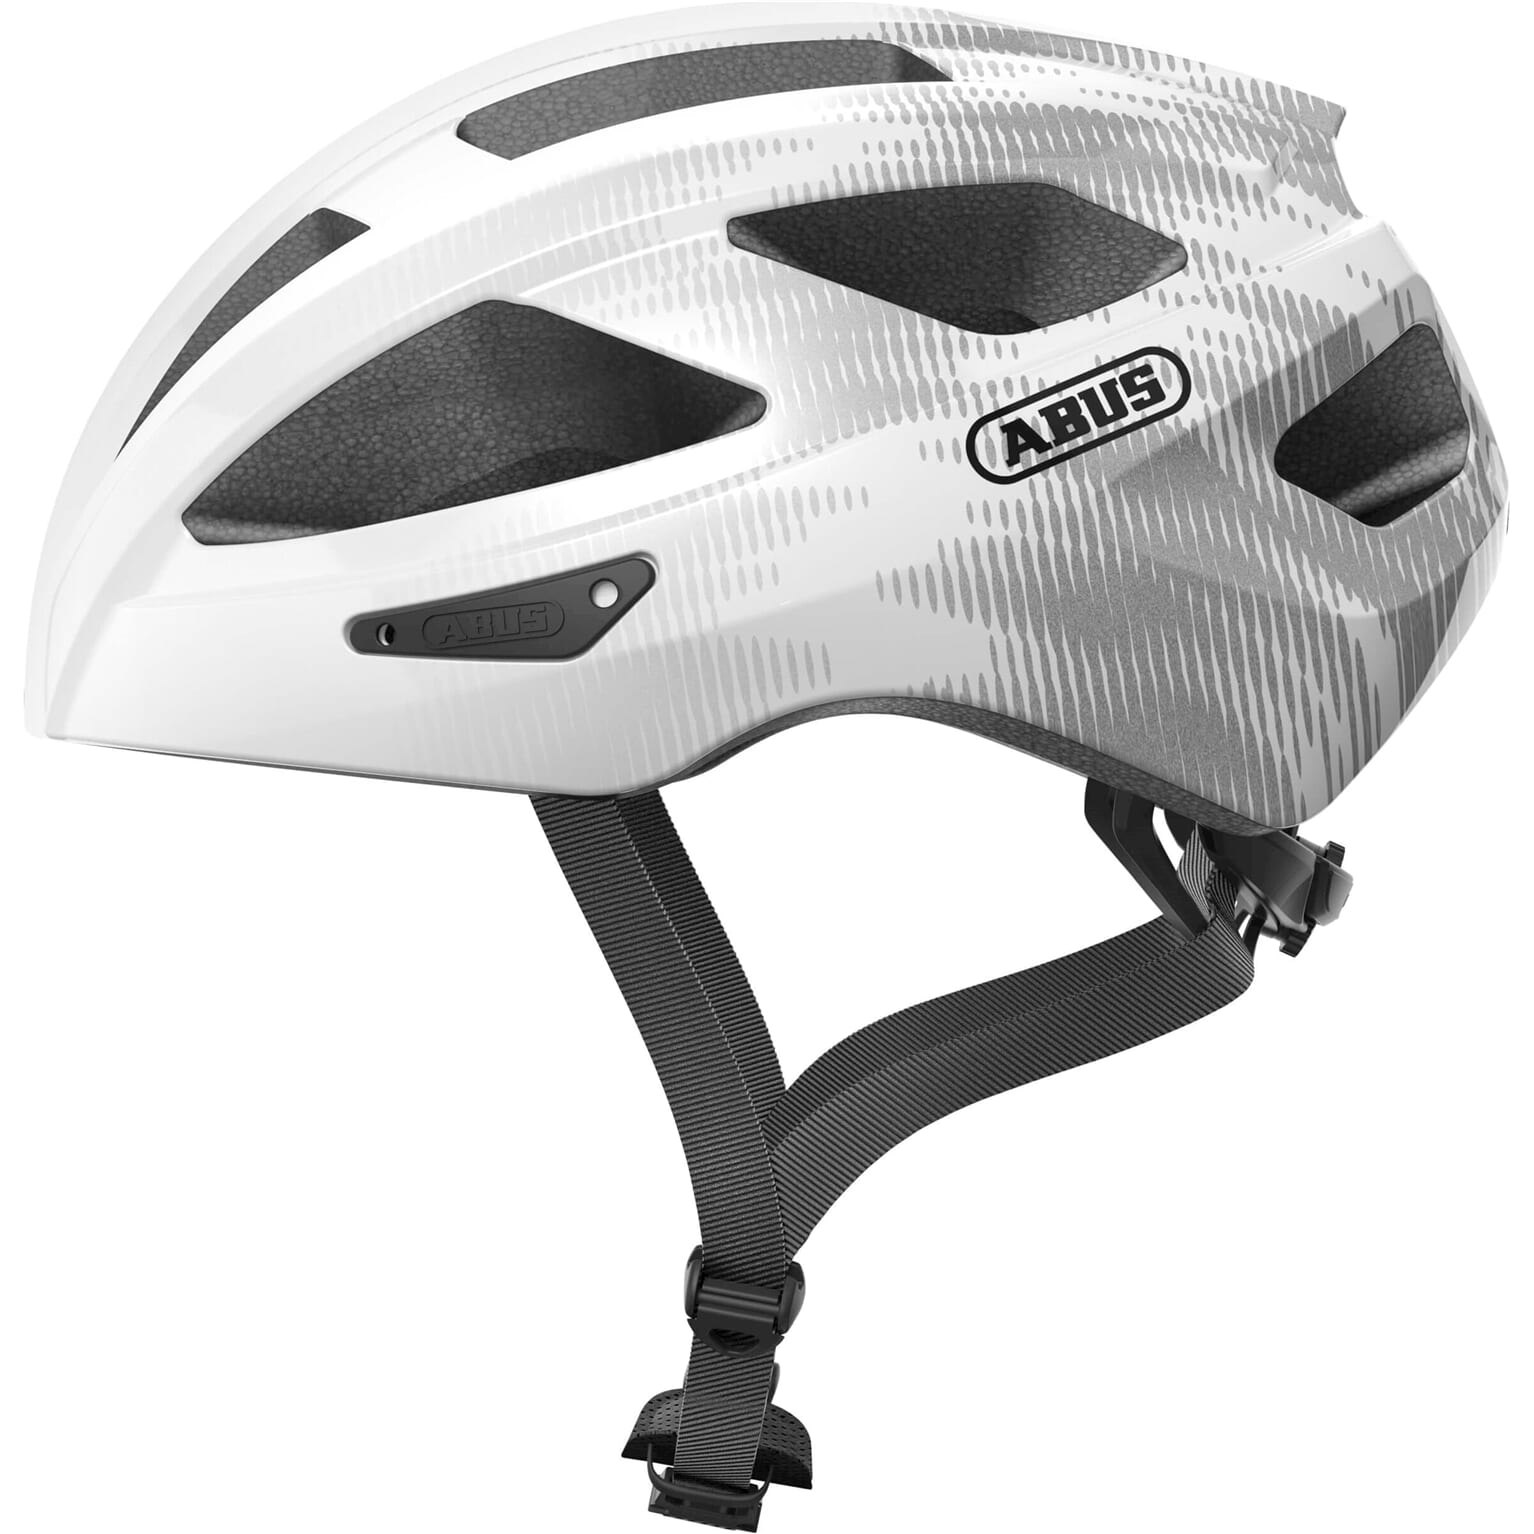 Abus helm Macator white silver M 52-58cm